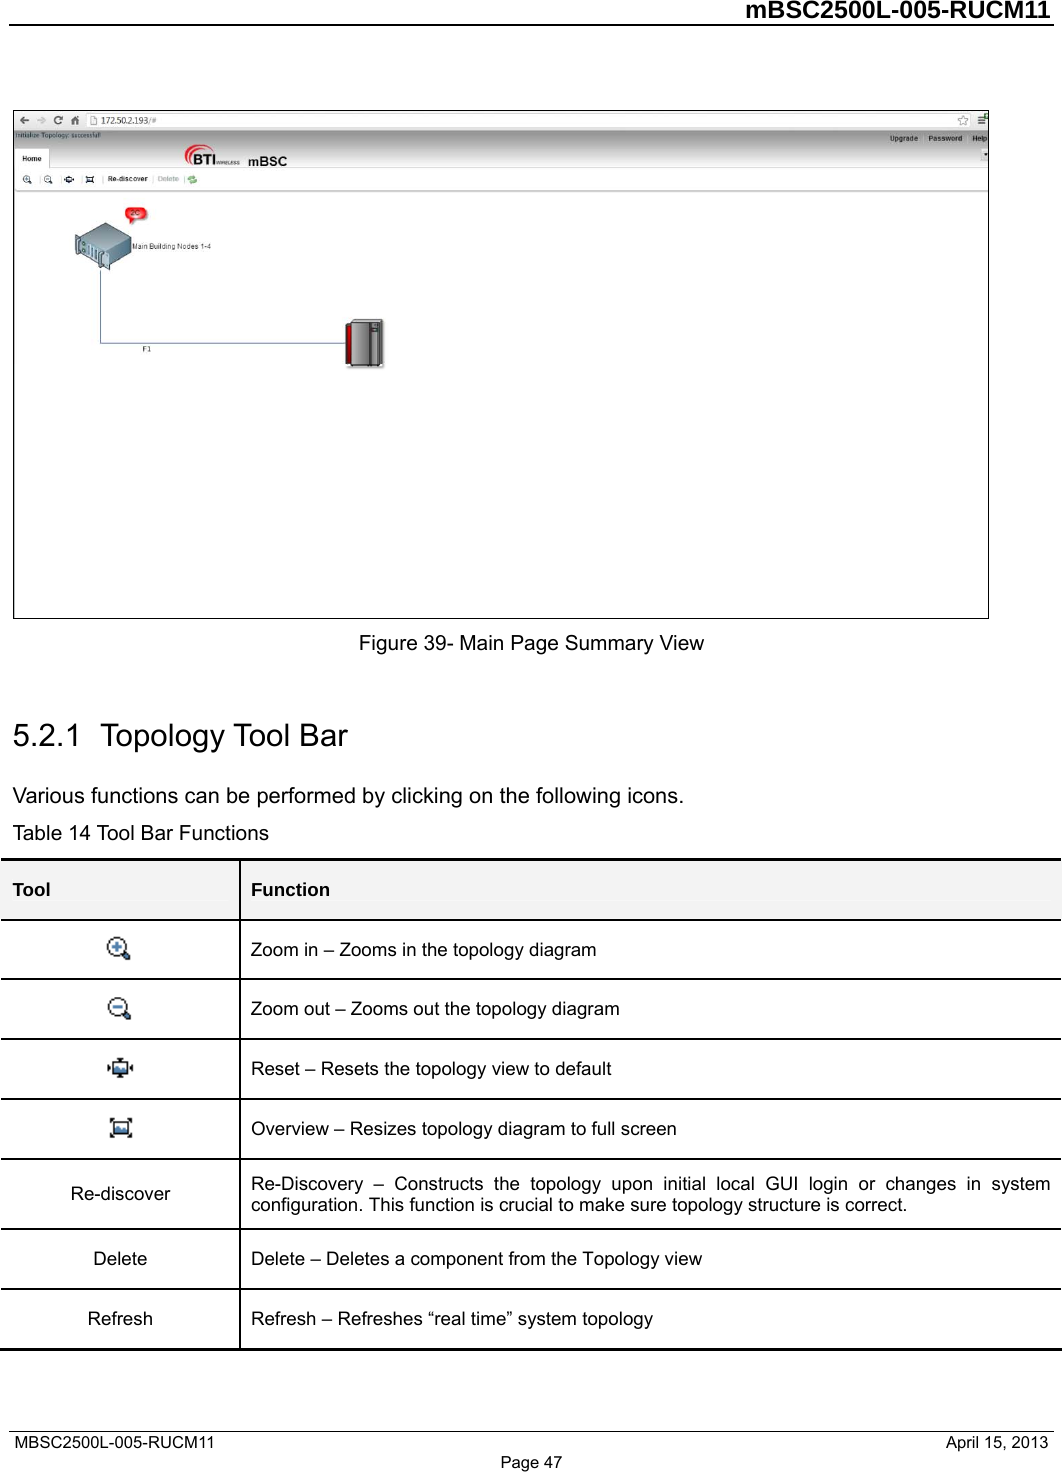         mBSC2500L-005-RUCM11   MBSC2500L-005-RUCM11                                April 15, 2013  Figure 39- Main Page Summary View  5.2.1  Topology Tool Bar Various functions can be performed by clicking on the following icons. Table 14 Tool Bar Functions Tool  Function  Zoom in – Zooms in the topology diagram  Zoom out – Zooms out the topology diagram  Reset – Resets the topology view to default  Overview – Resizes topology diagram to full screen   Re-discover  Re-Discovery – Constructs the topology upon initial local GUI login or changes in system configuration. This function is crucial to make sure topology structure is correct. Delete  Delete – Deletes a component from the Topology view Refresh  Refresh – Refreshes “real time” system topology  Page 47 